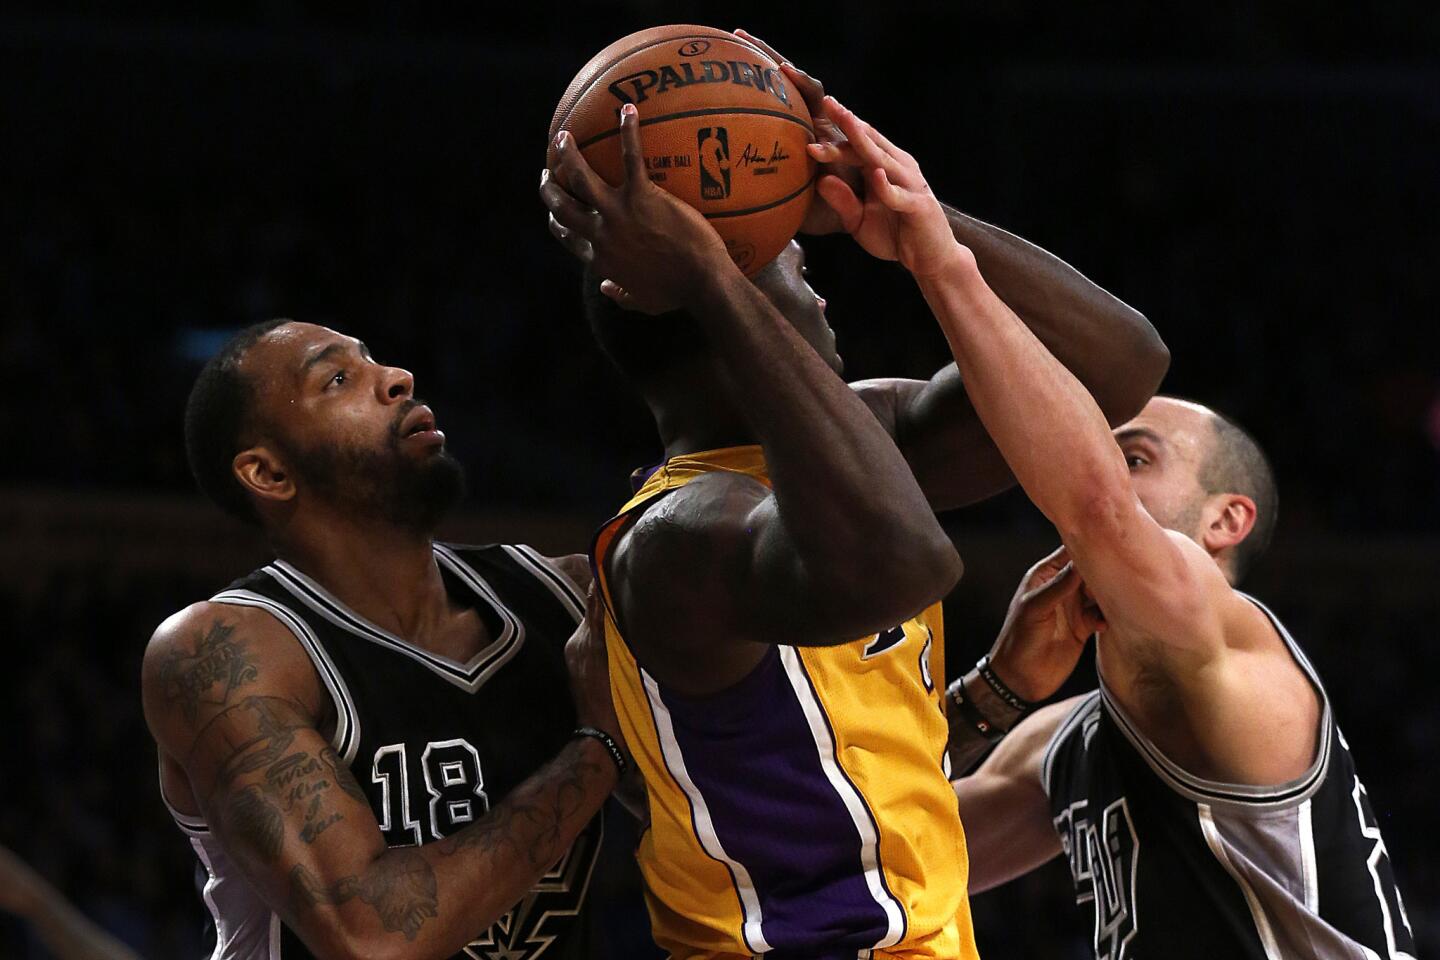 Lakers forward Brandon Bass looks to pass out of the double-team defense of Spurs forward Rasual Butler, left, and guard Manu Ginobili.